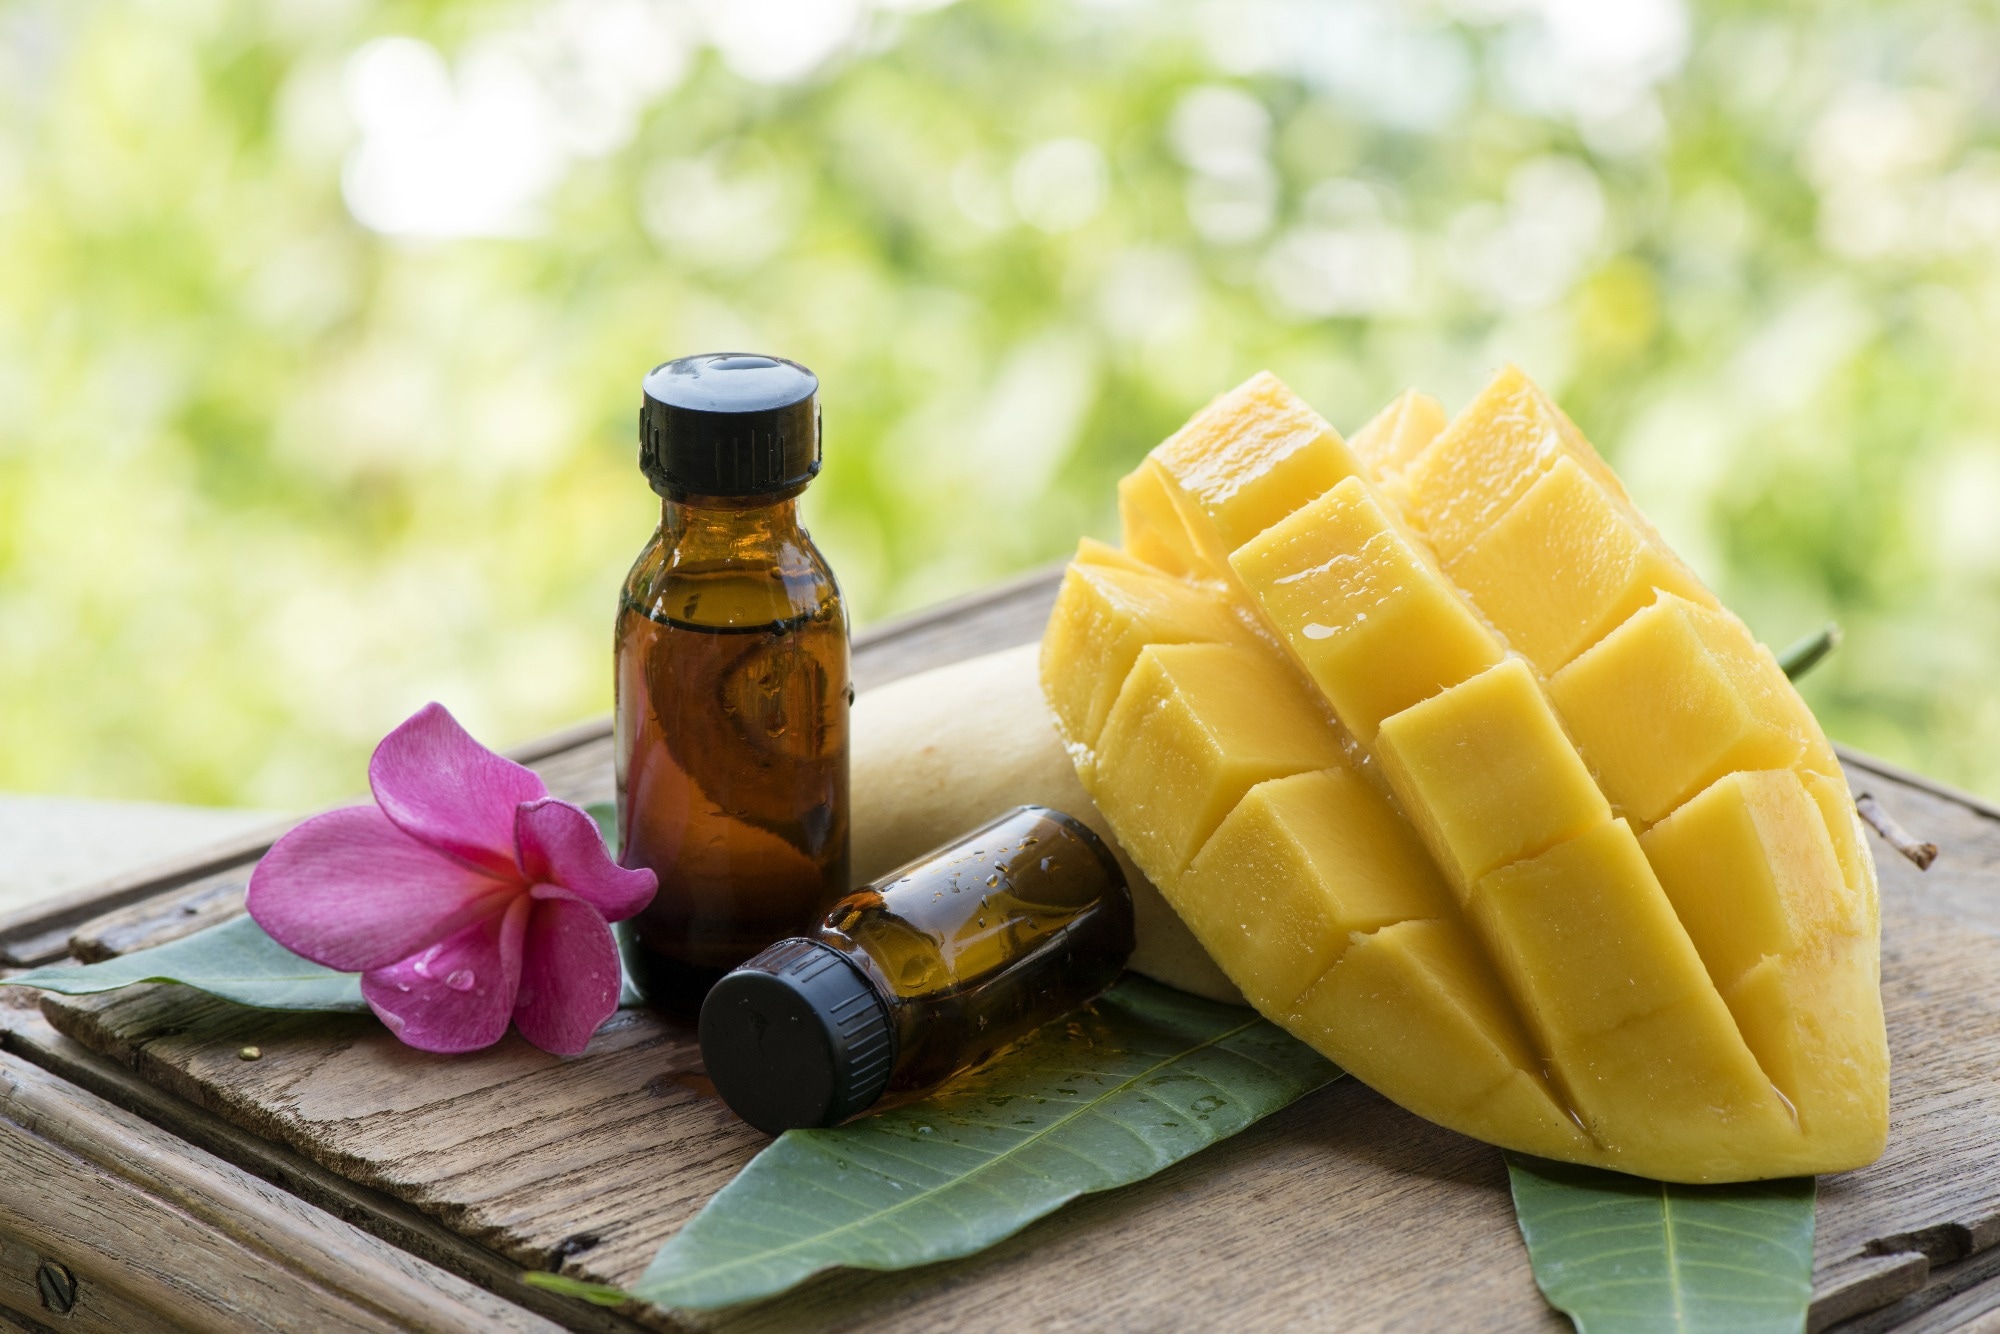 Study: Mangiferin (mango) attenuates AOM-induced colorectal cancer in rat’s colon by augmentation of apoptotic proteins and antioxidant mechanisms. Image Credit: wasanajai/Shutterstock.com